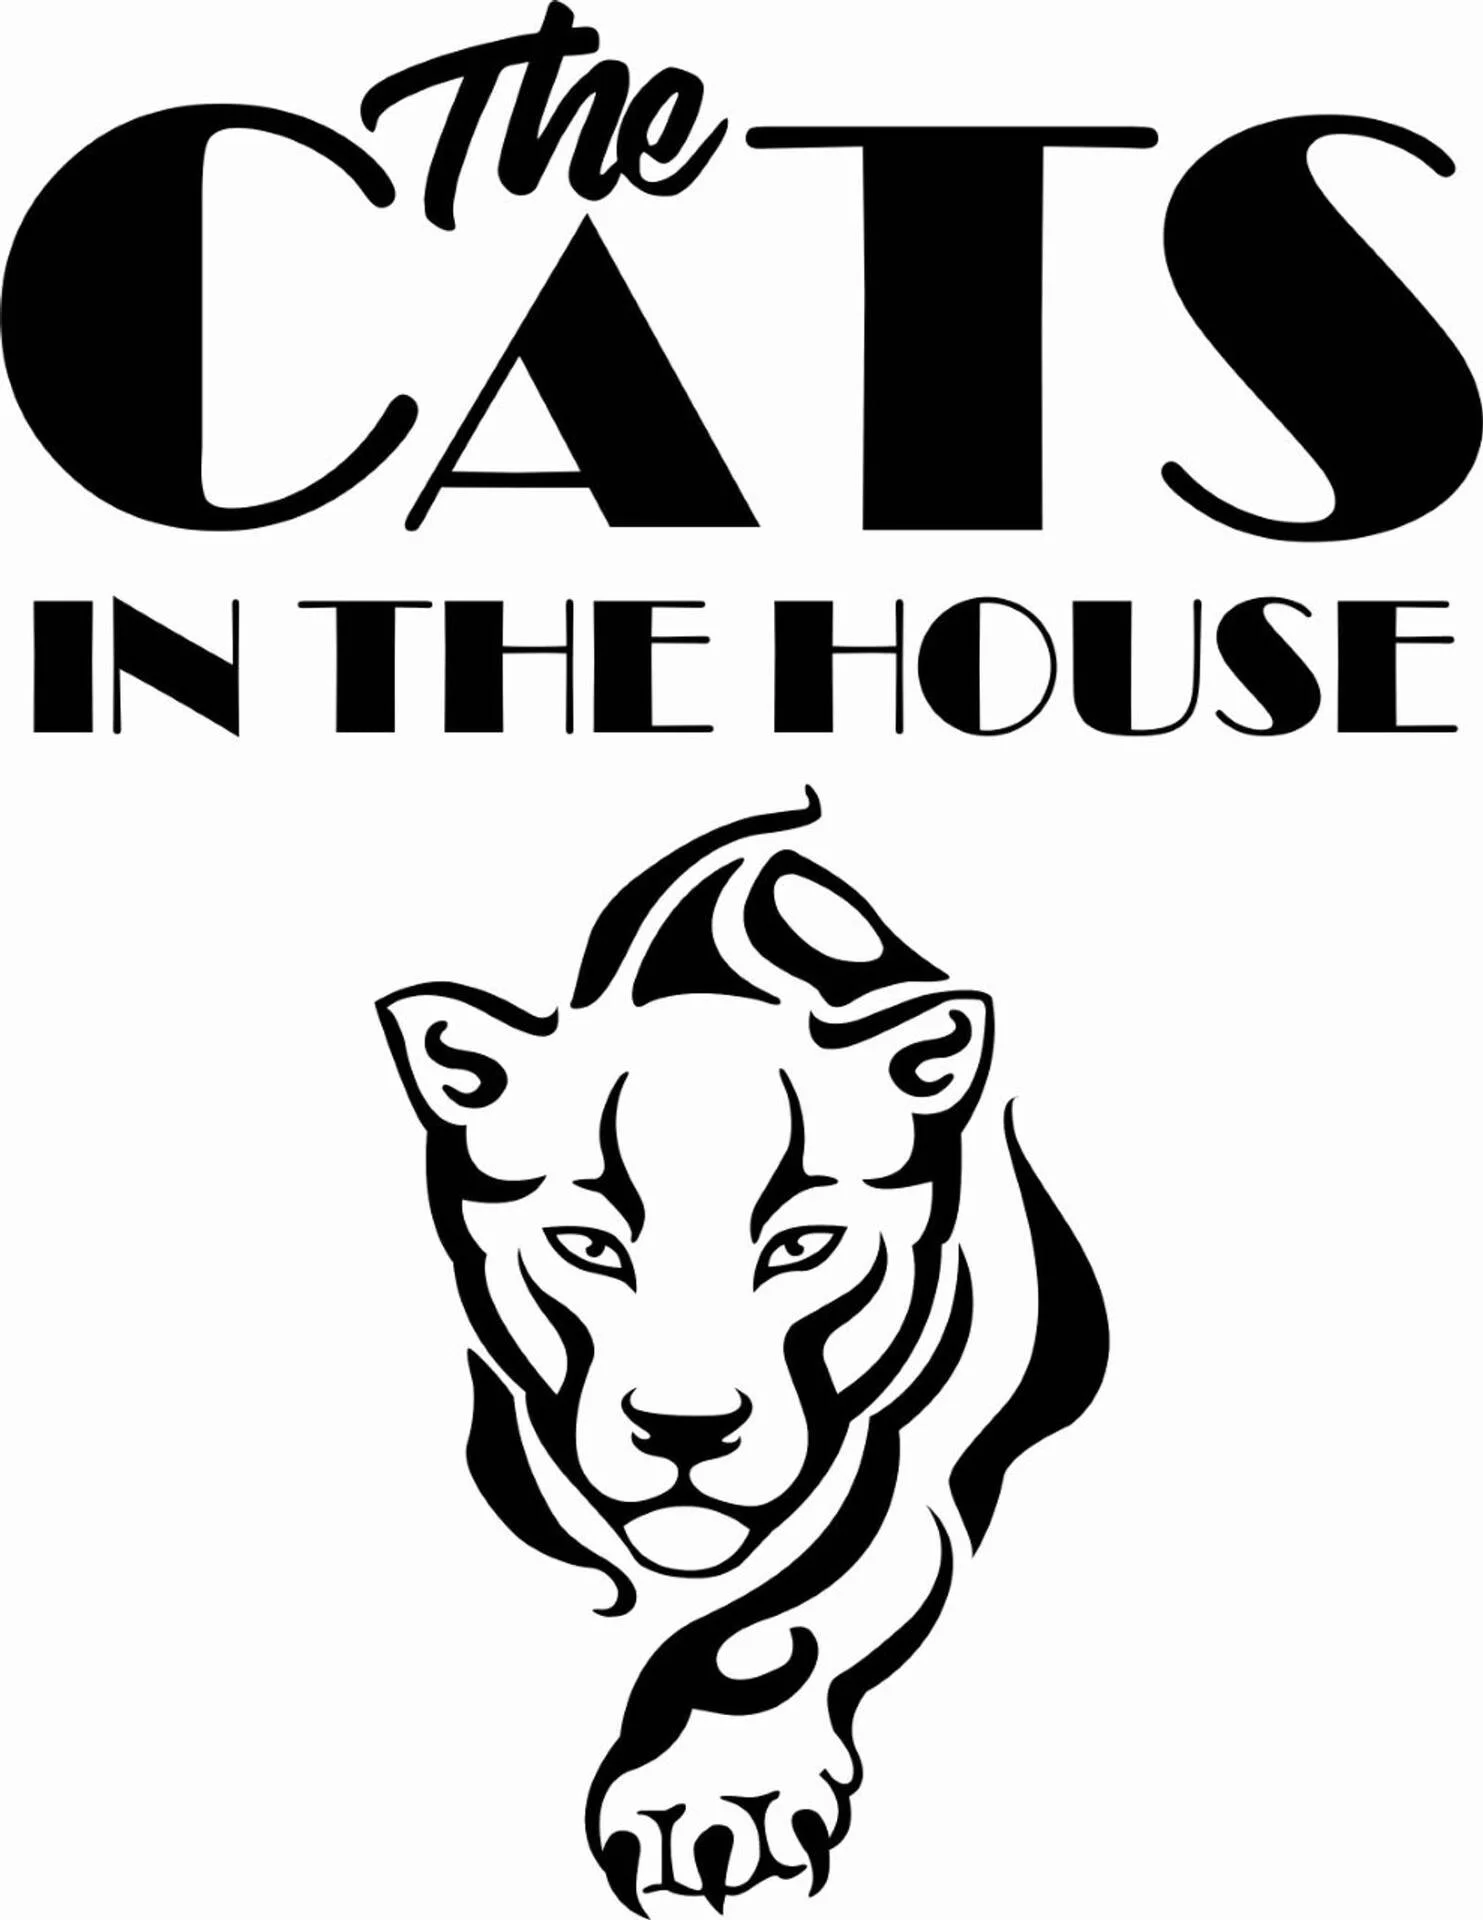 The Cats In The House